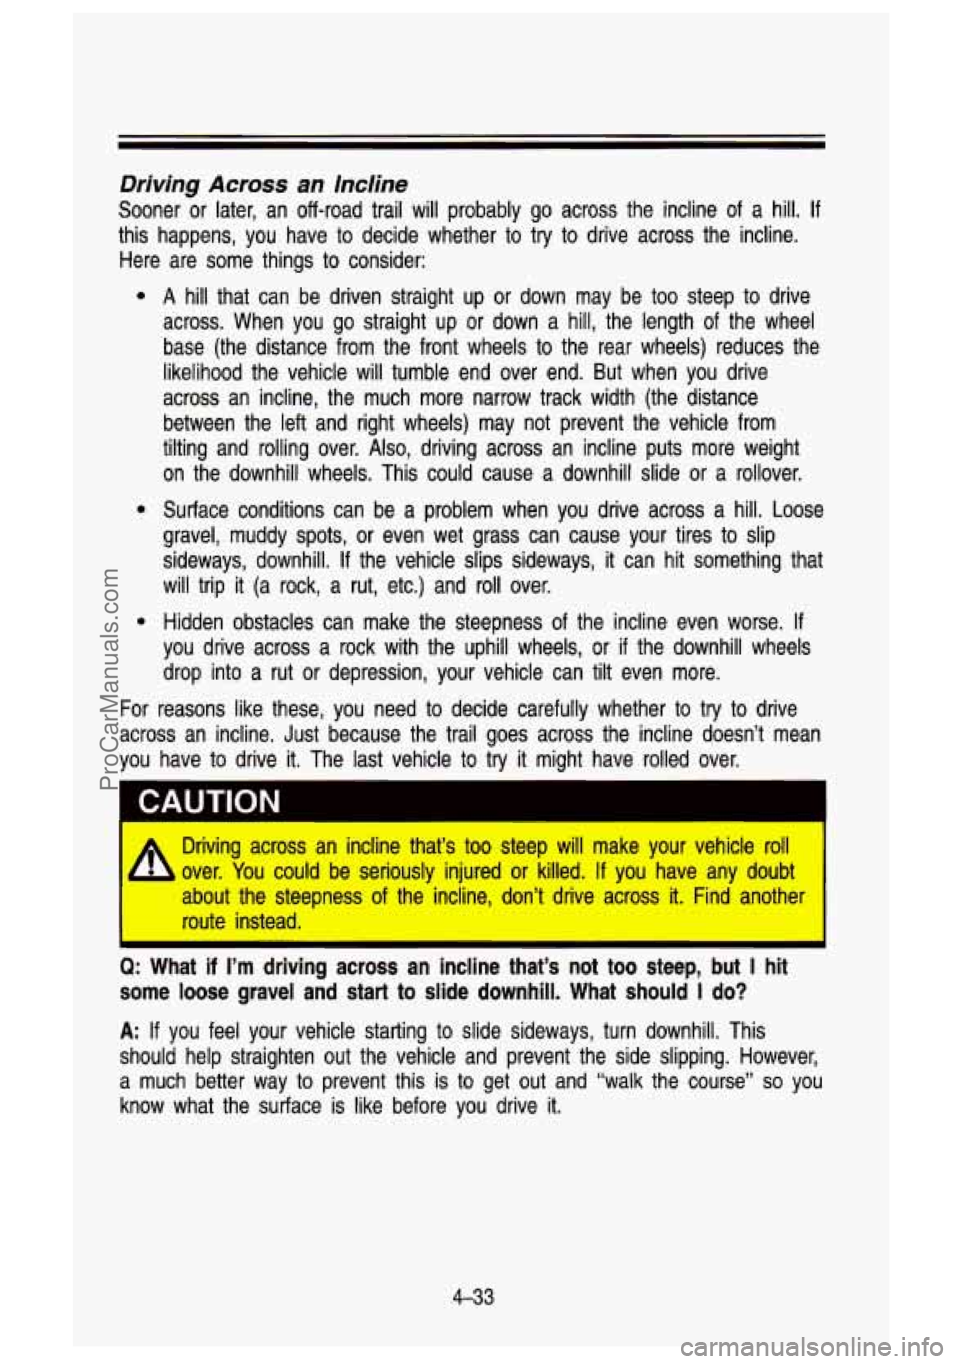 GMC SIERRA 1993  Owners Manual Driving Across an Incline 
Sooner or later,  an  off-road trail will  probably  go  across  the  incline of a hill. If 
this  happens,  you  have  to  decide  whether  to  try  to drive  across  the i